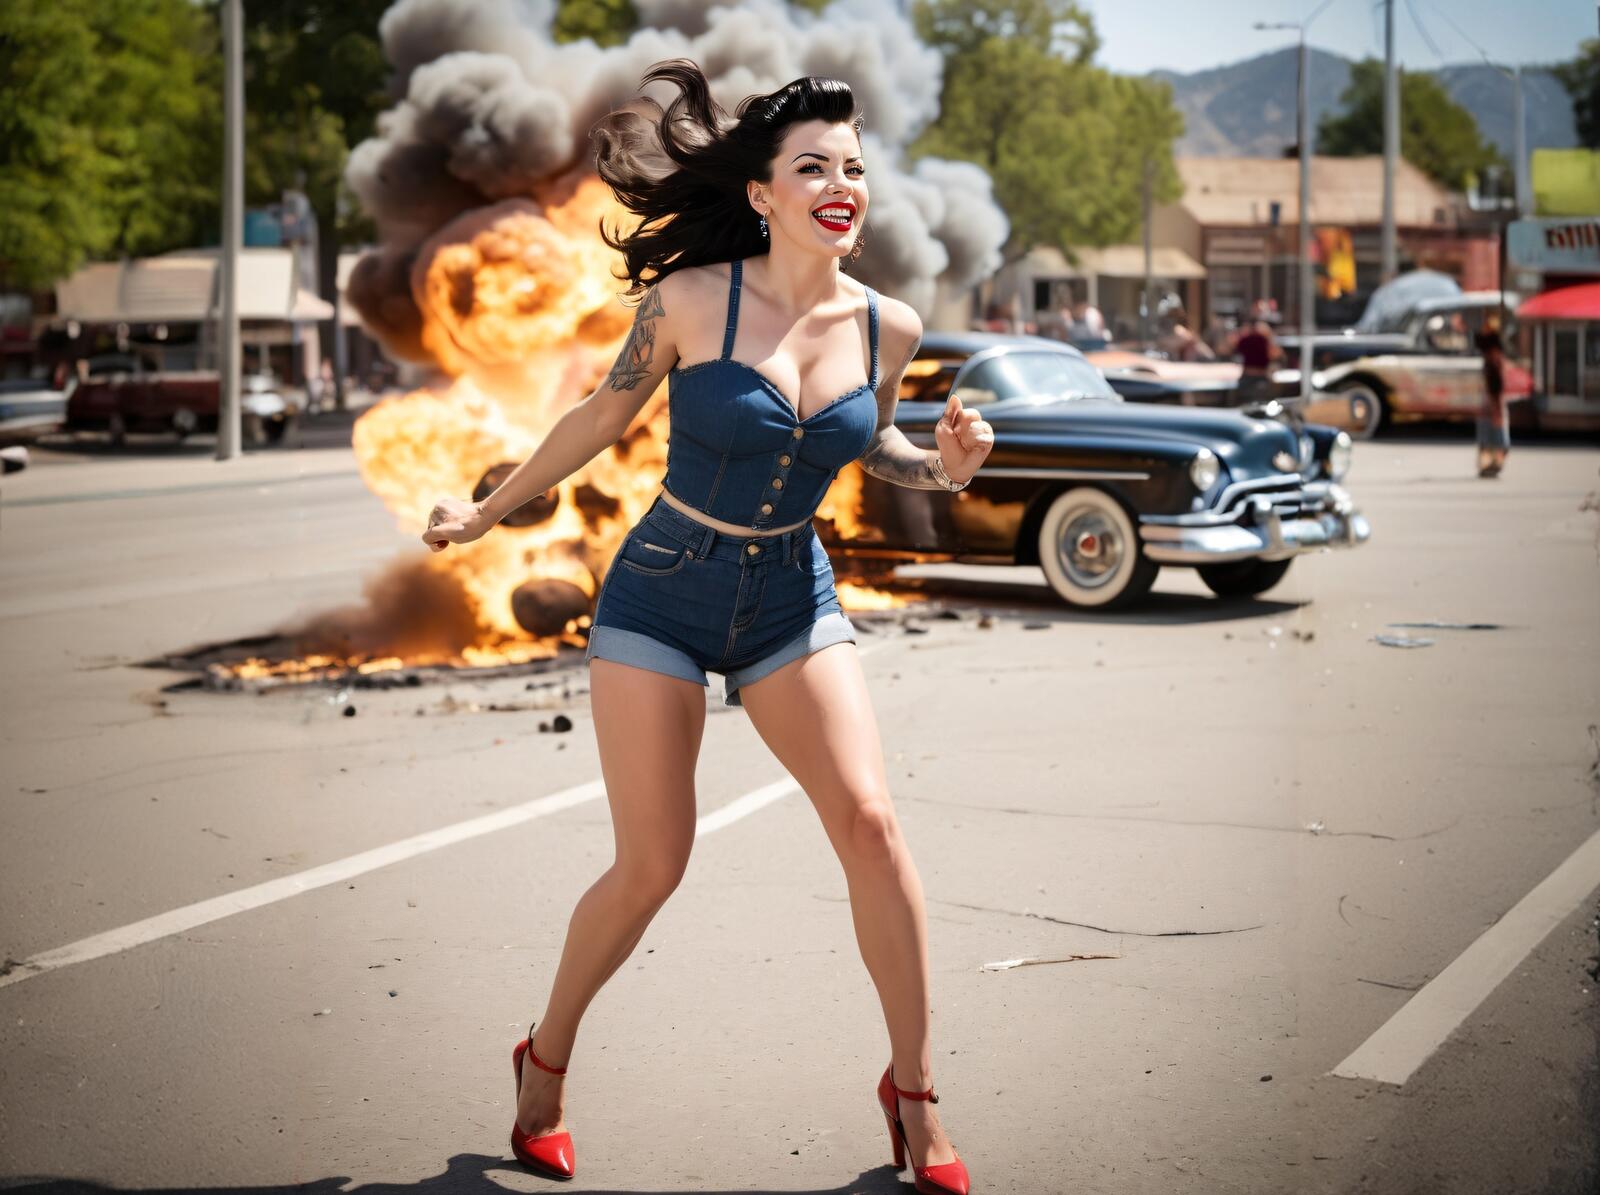 Free photo The girl and the car explosion